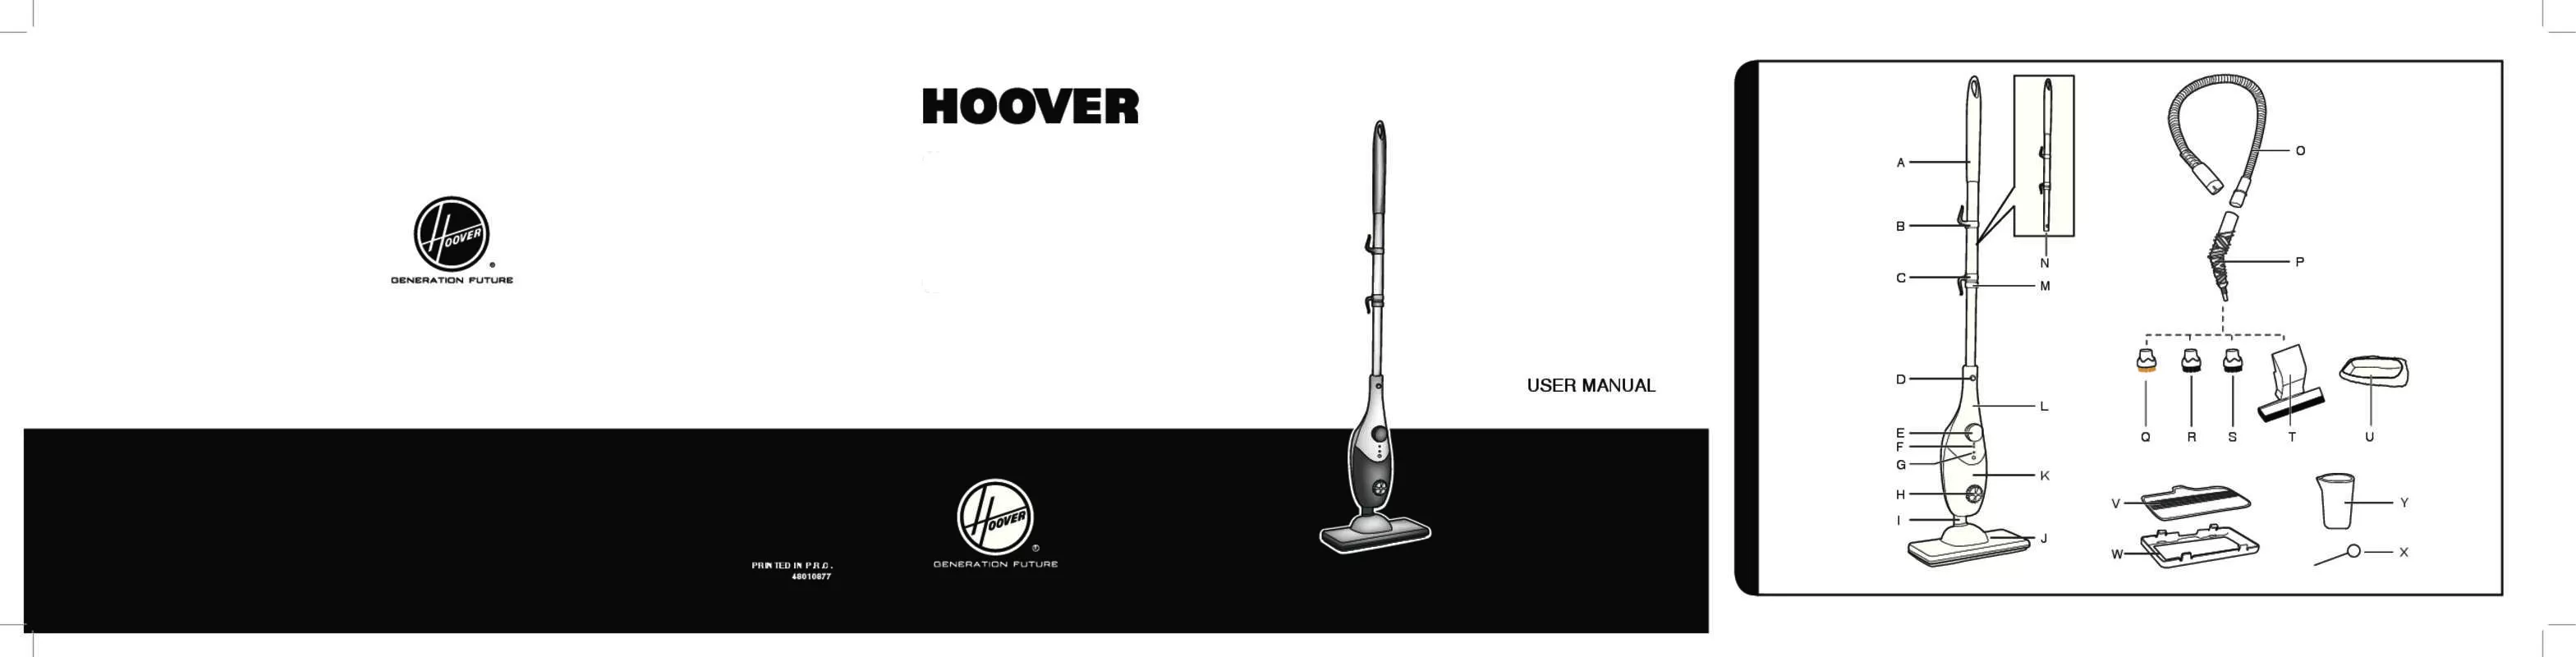 Mode d'emploi HOOVER S2IN1300C